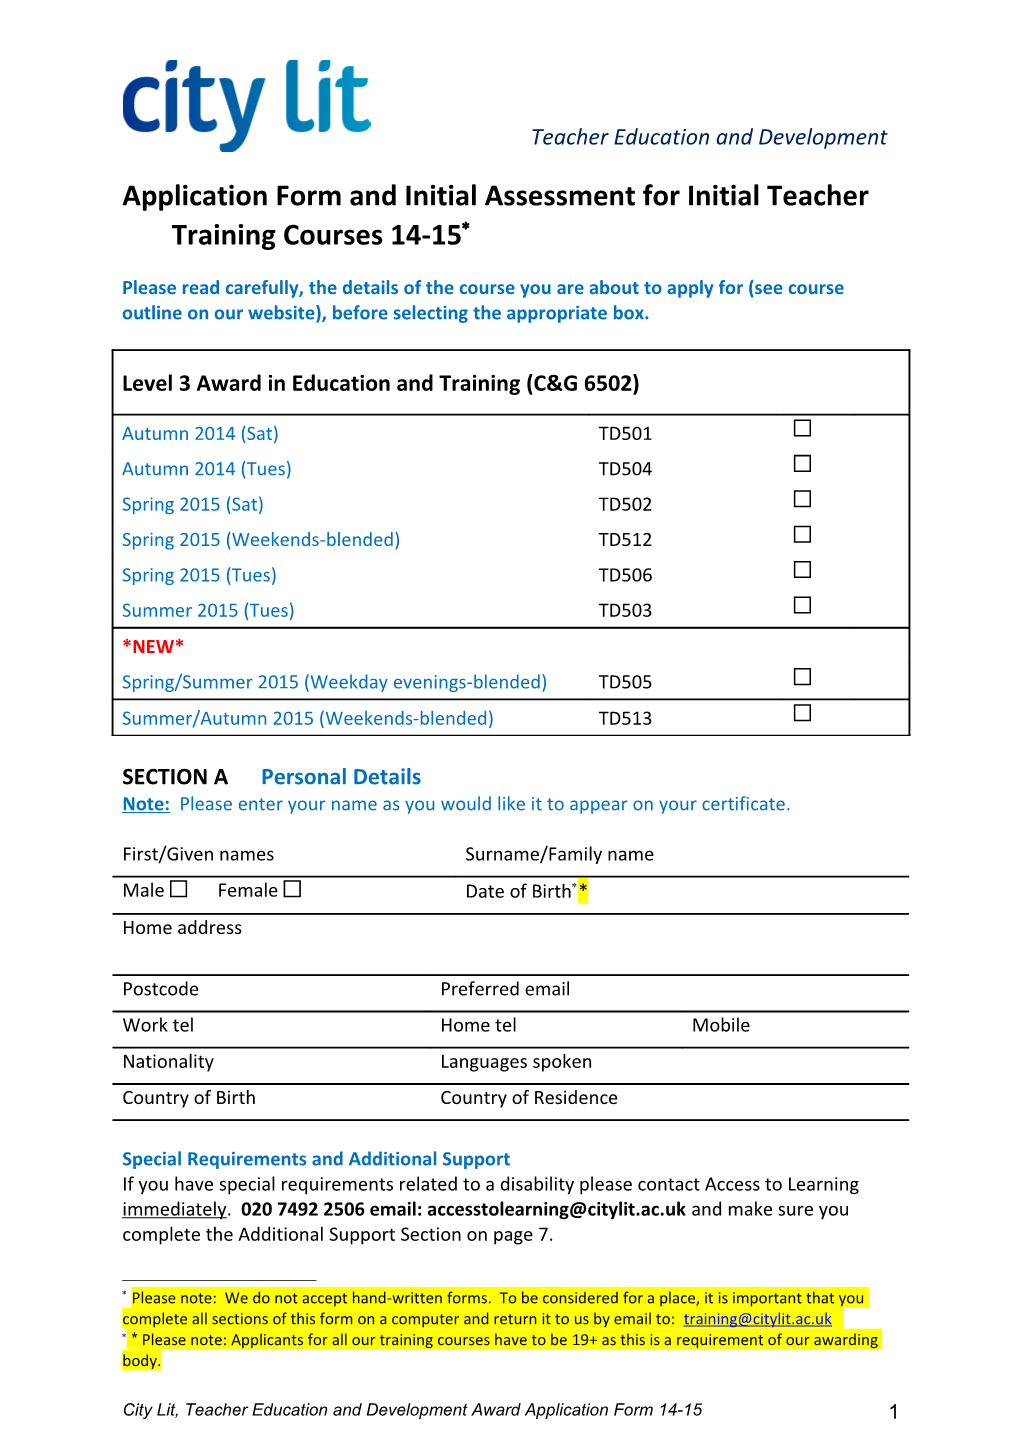 Application Form and Initial Assessment for Initial Teacher Training Courses 14-15 (